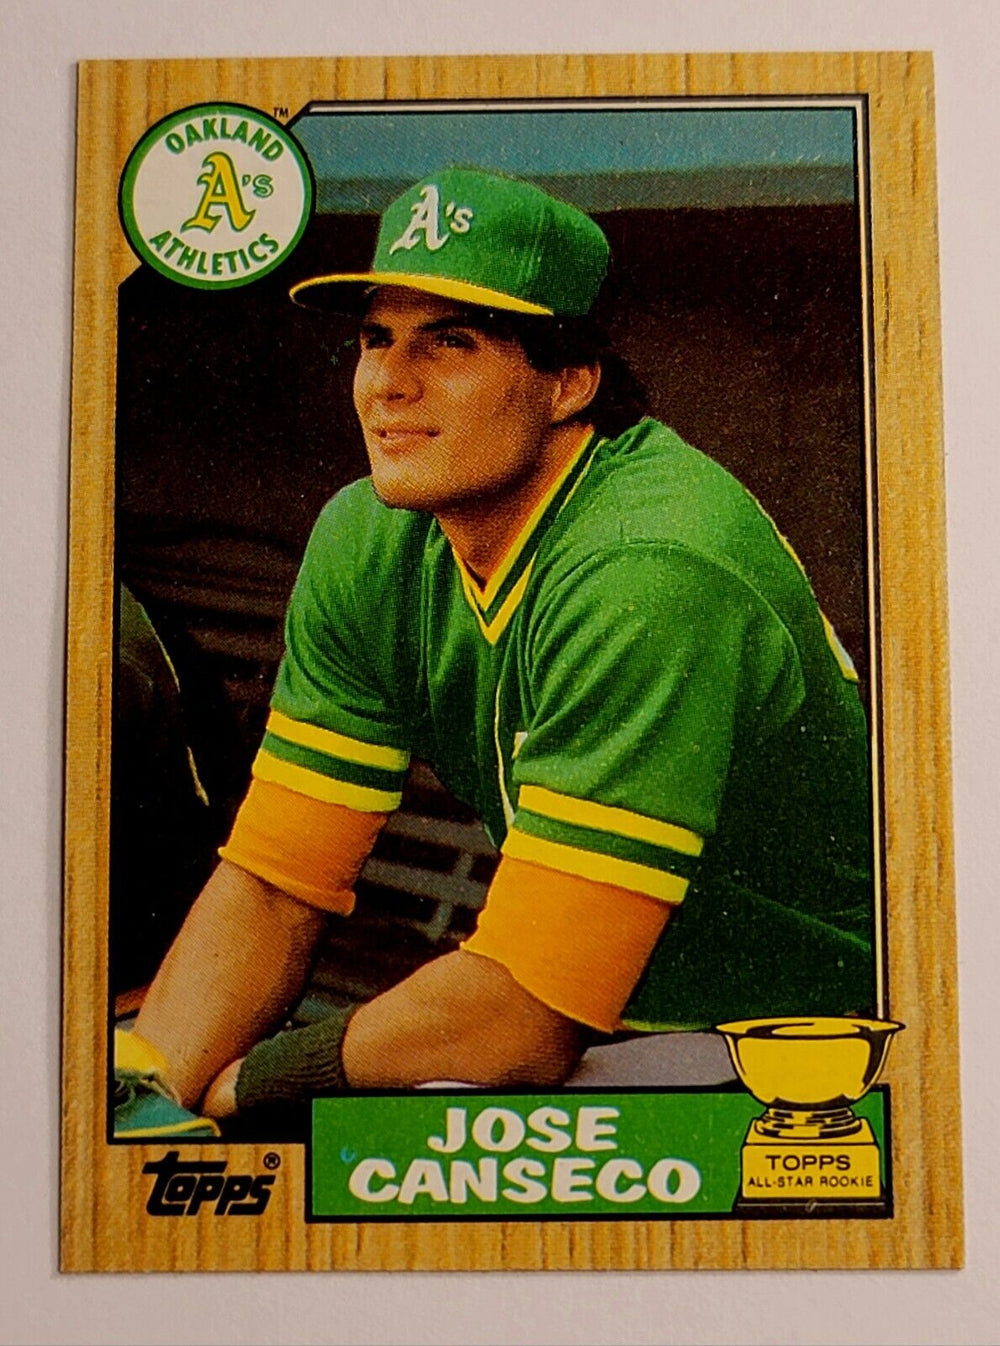 Jose Canseco 1987 Topps Series Mint Card #620